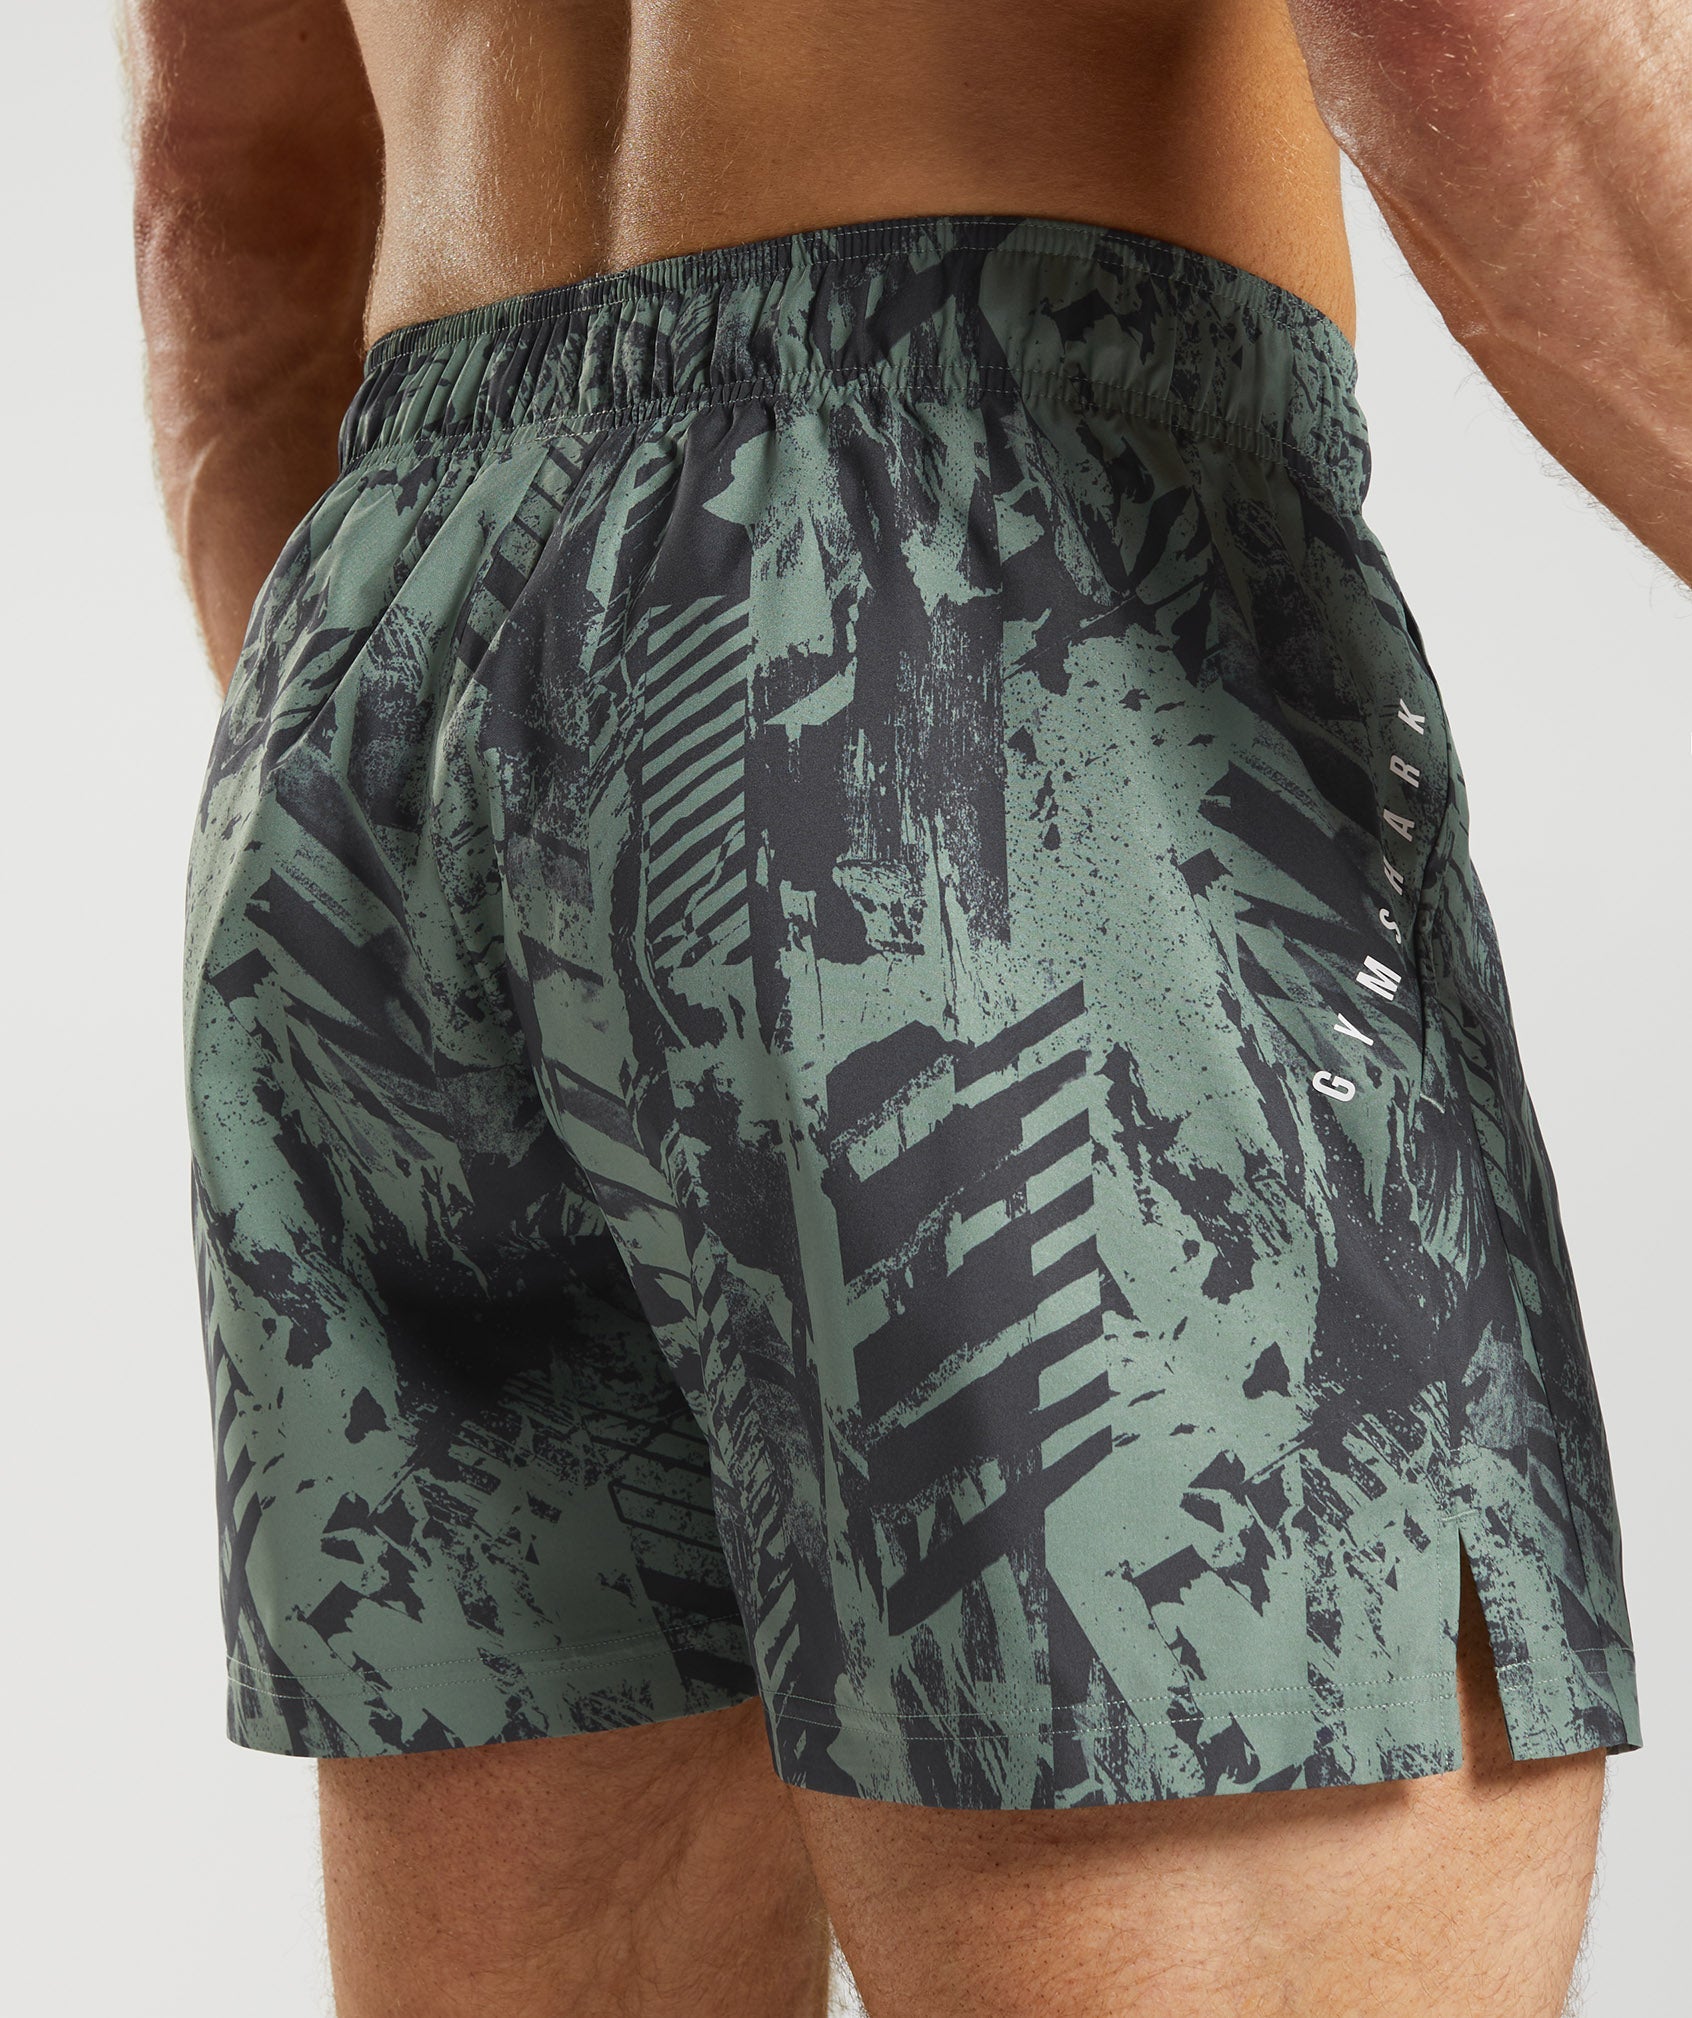 Sport 5" Shorts in Willow Green Print - view 6